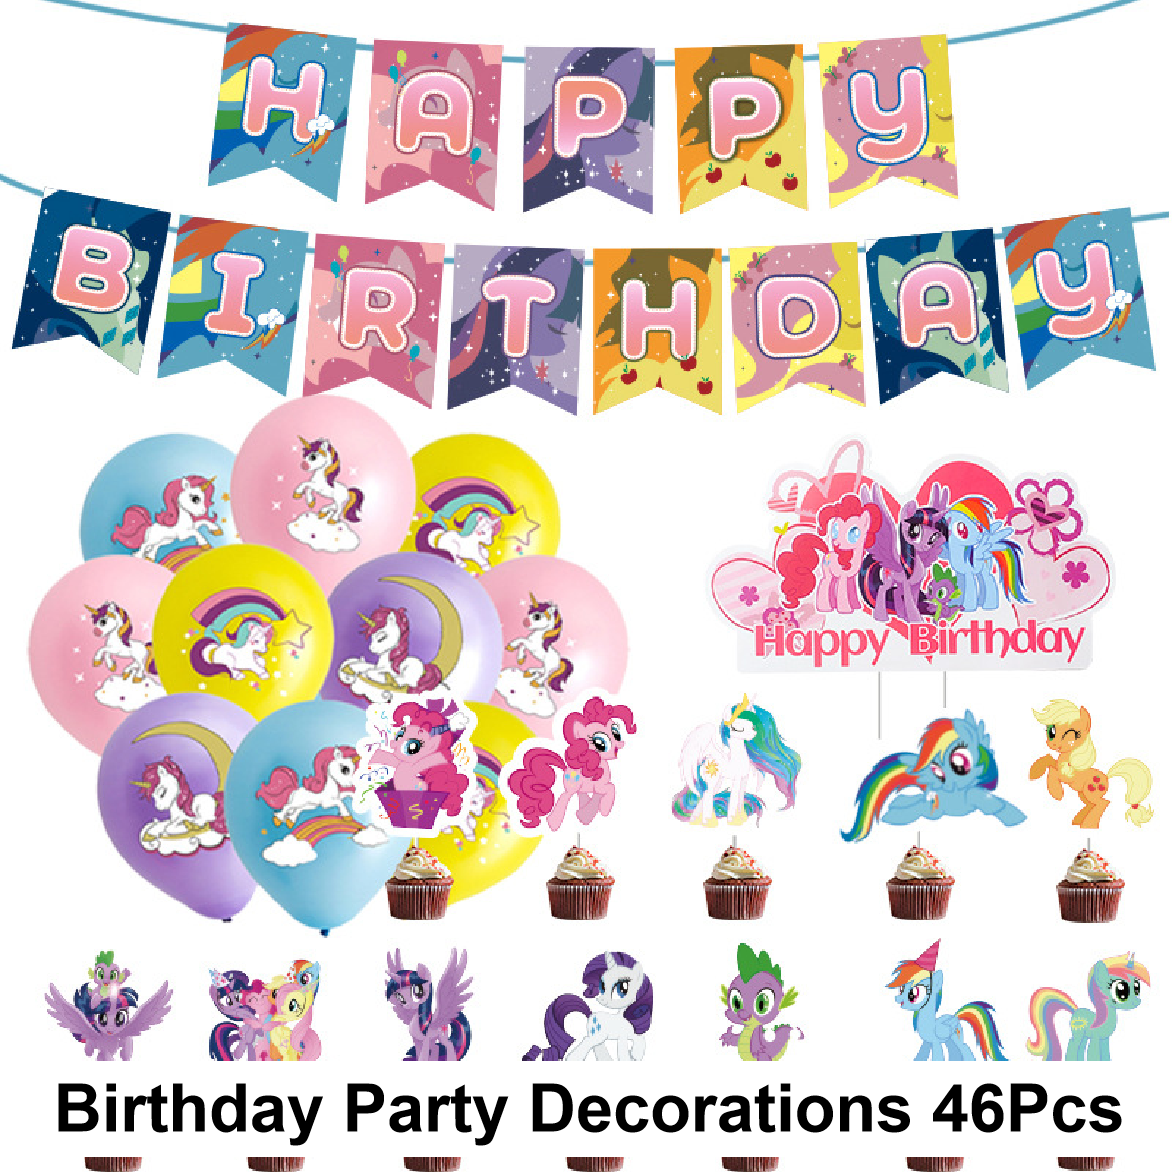 Party Decorations - My Little Pony Ultimate Party (Banner, Balloons, Cupcake Toppers) - Set 46pcs